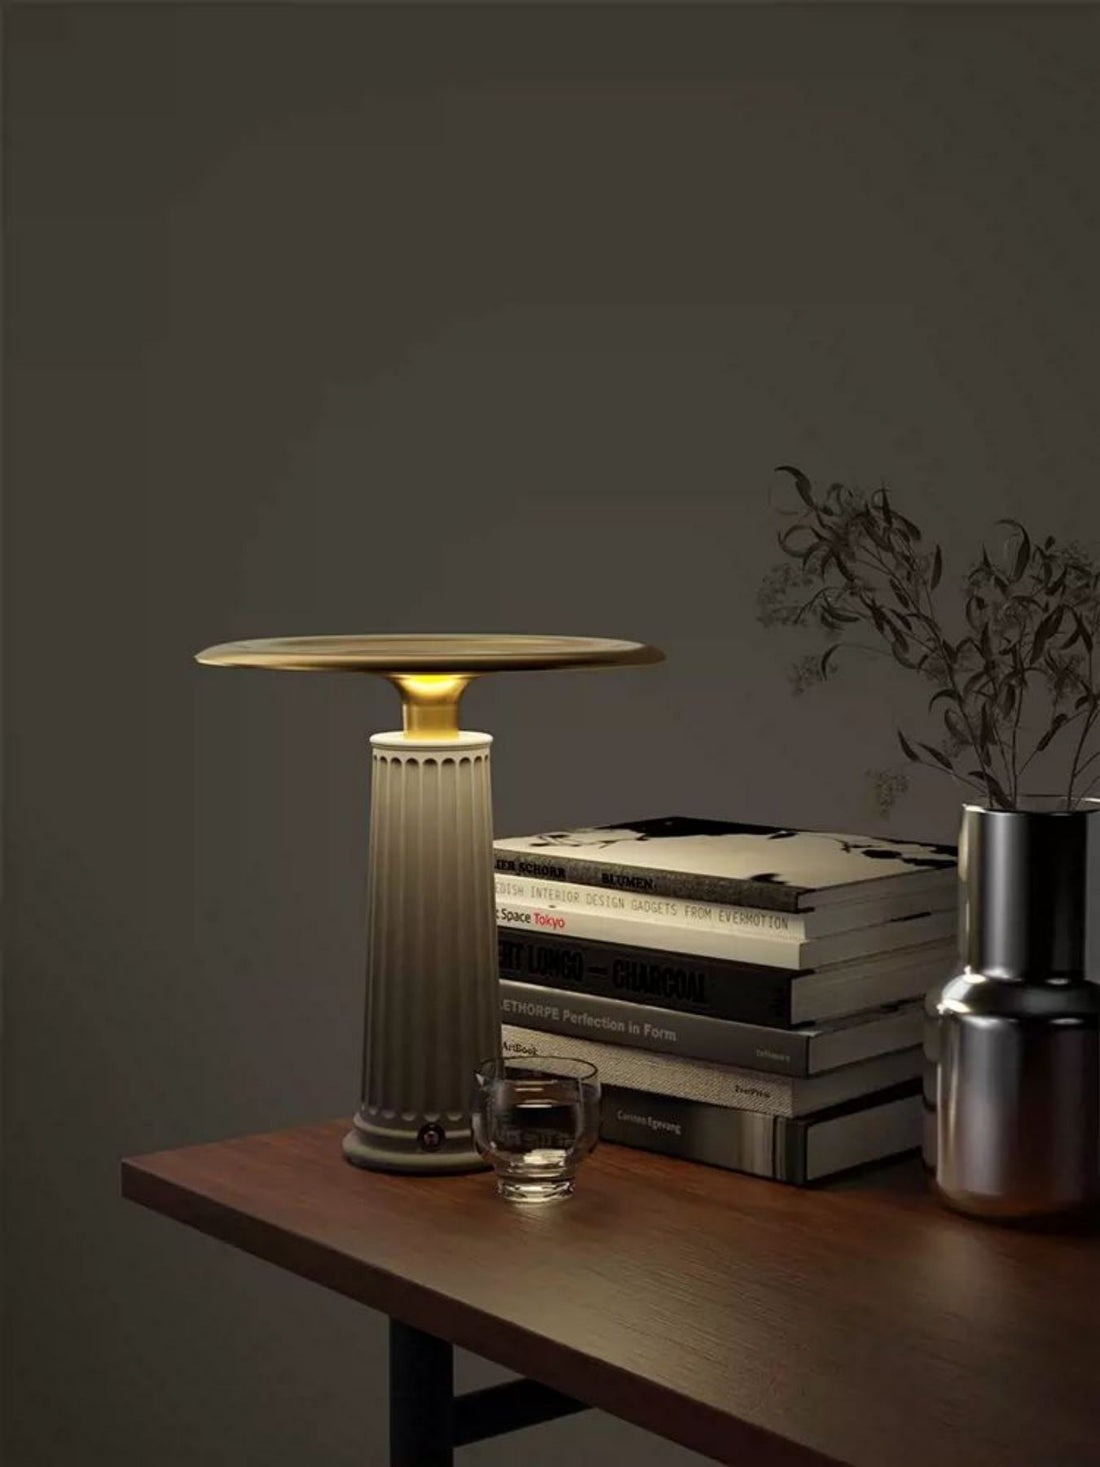 adjustable desk lamp，bed lamp table，charger table lamp，column table lamp，cylinder table lamp，decor table lamp，desk lamp for office，desk lamp modern，dimming table lamp，diy table lamp，led lamp for desk，novelty table lamp，rechargeable study table lamp，sculpture table lamp，traditional table lamp，usb table lamp.